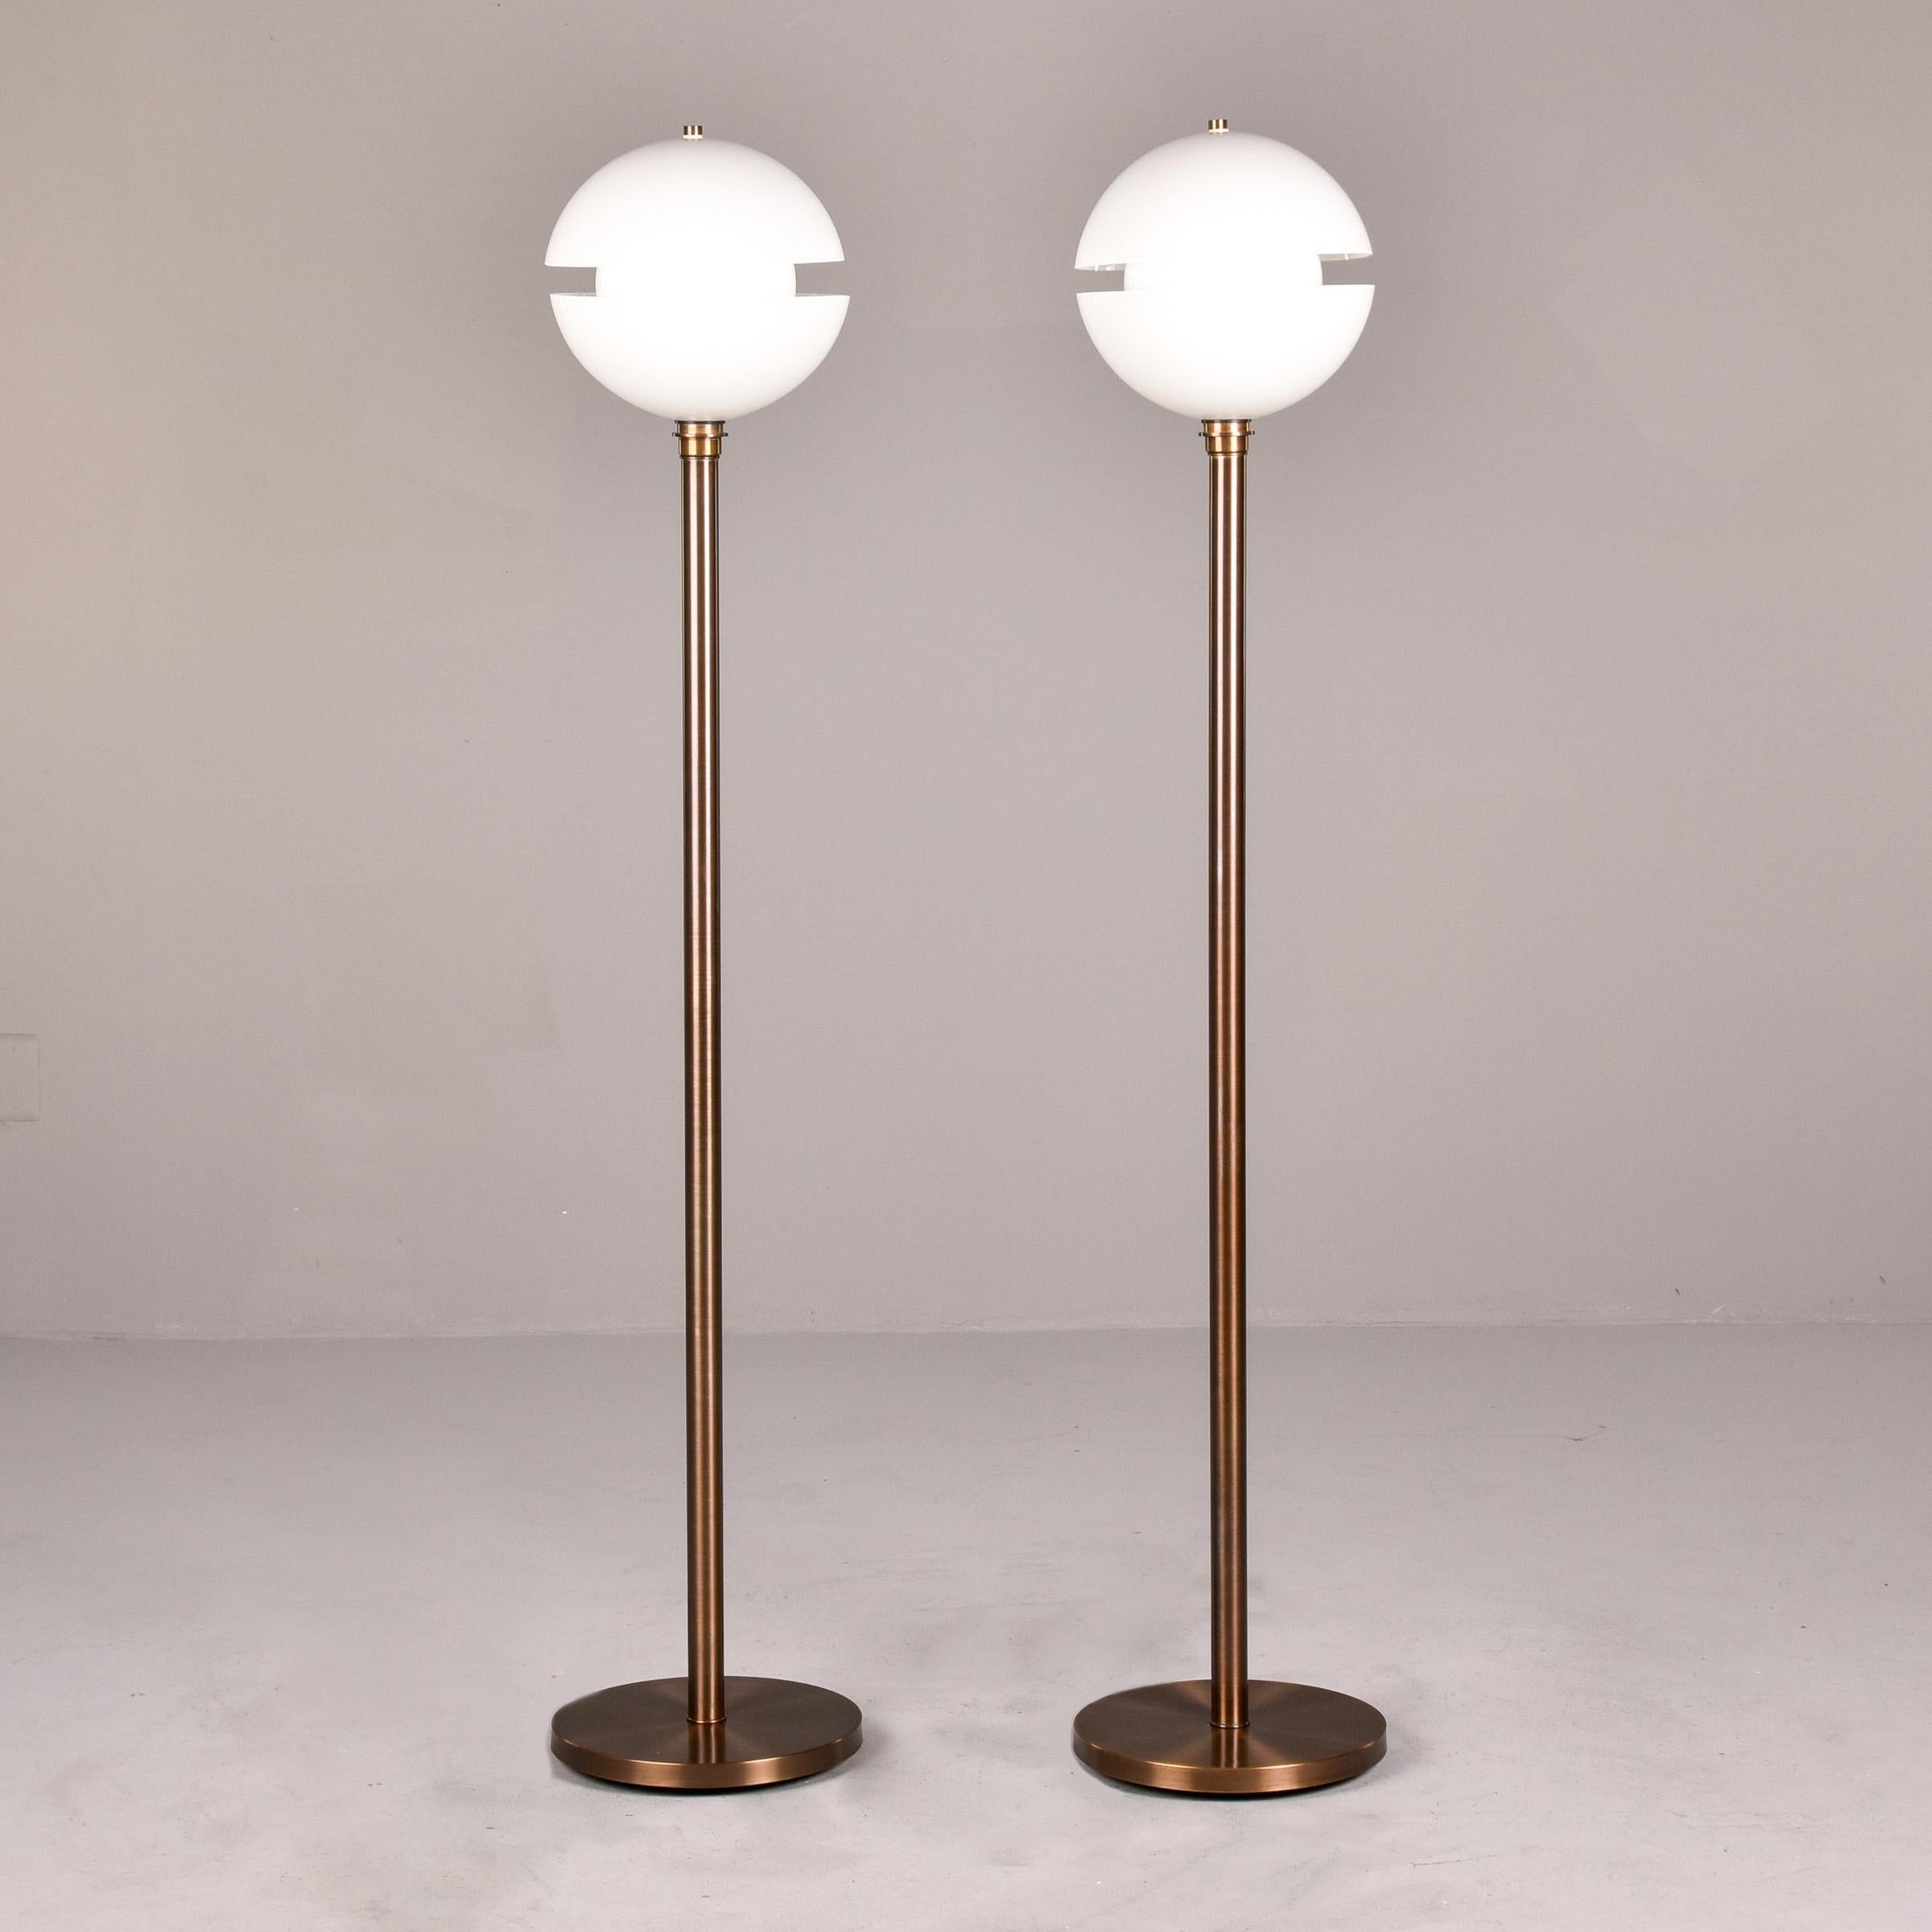 New and custom made by a regional glass artist, this pair of floor lamps have a dark finished brass base and center support with a white glass split globe and inner white globe. This simple yet striking design works well with mid century, modern or